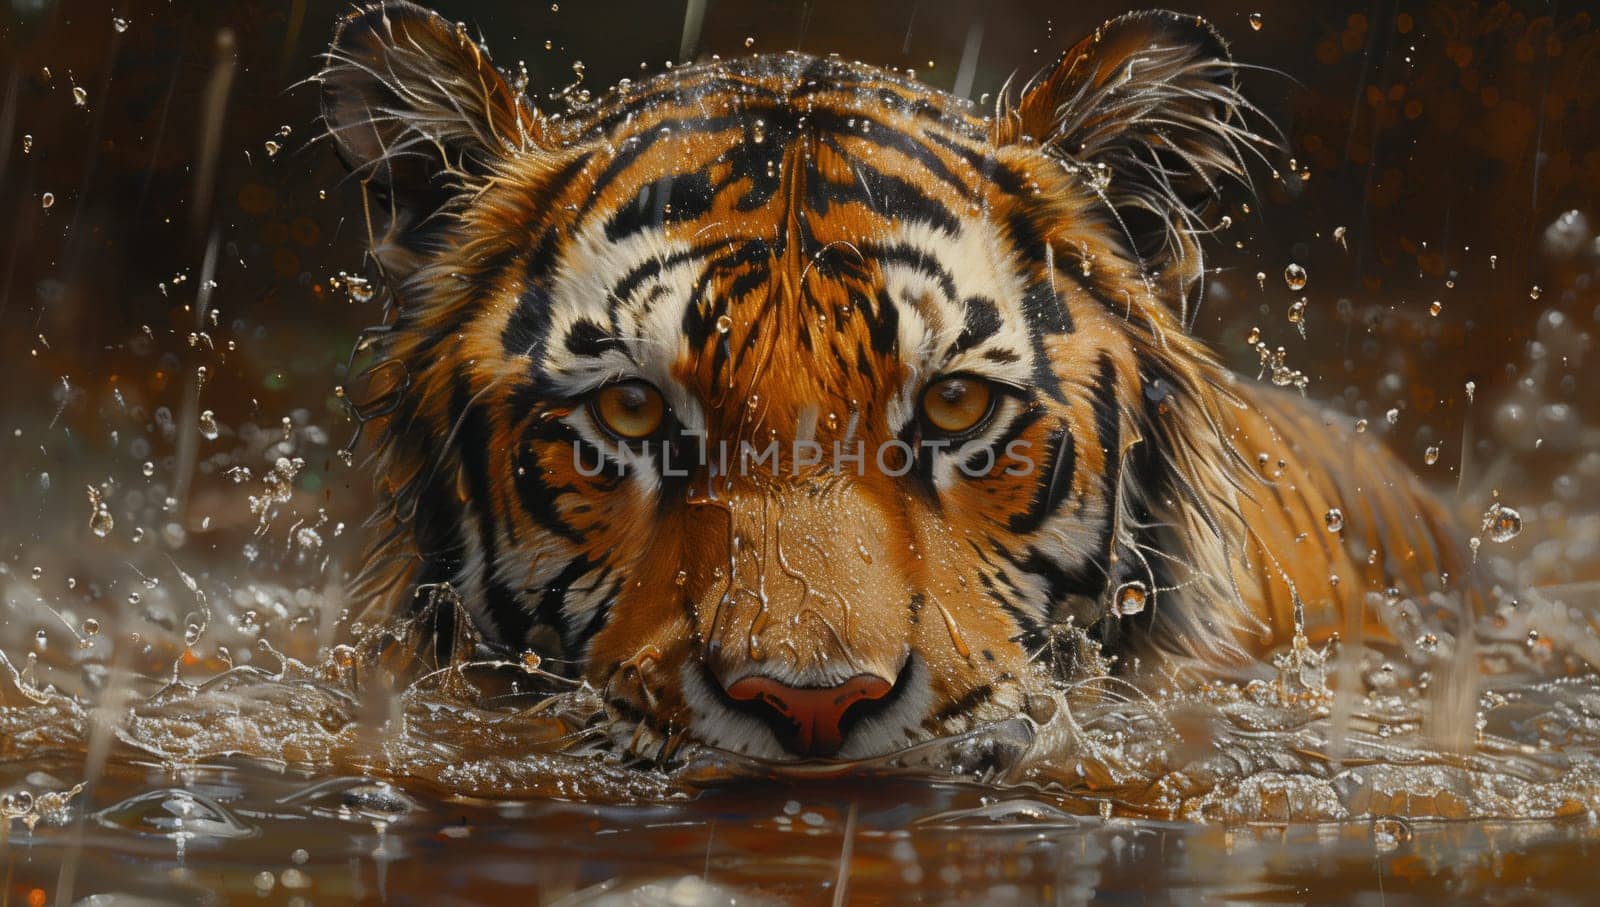 A Bengal tiger, a carnivorous organism belonging to the Felidae family of big cats, is swimming in the water and staring directly at the camera with its whiskers on display